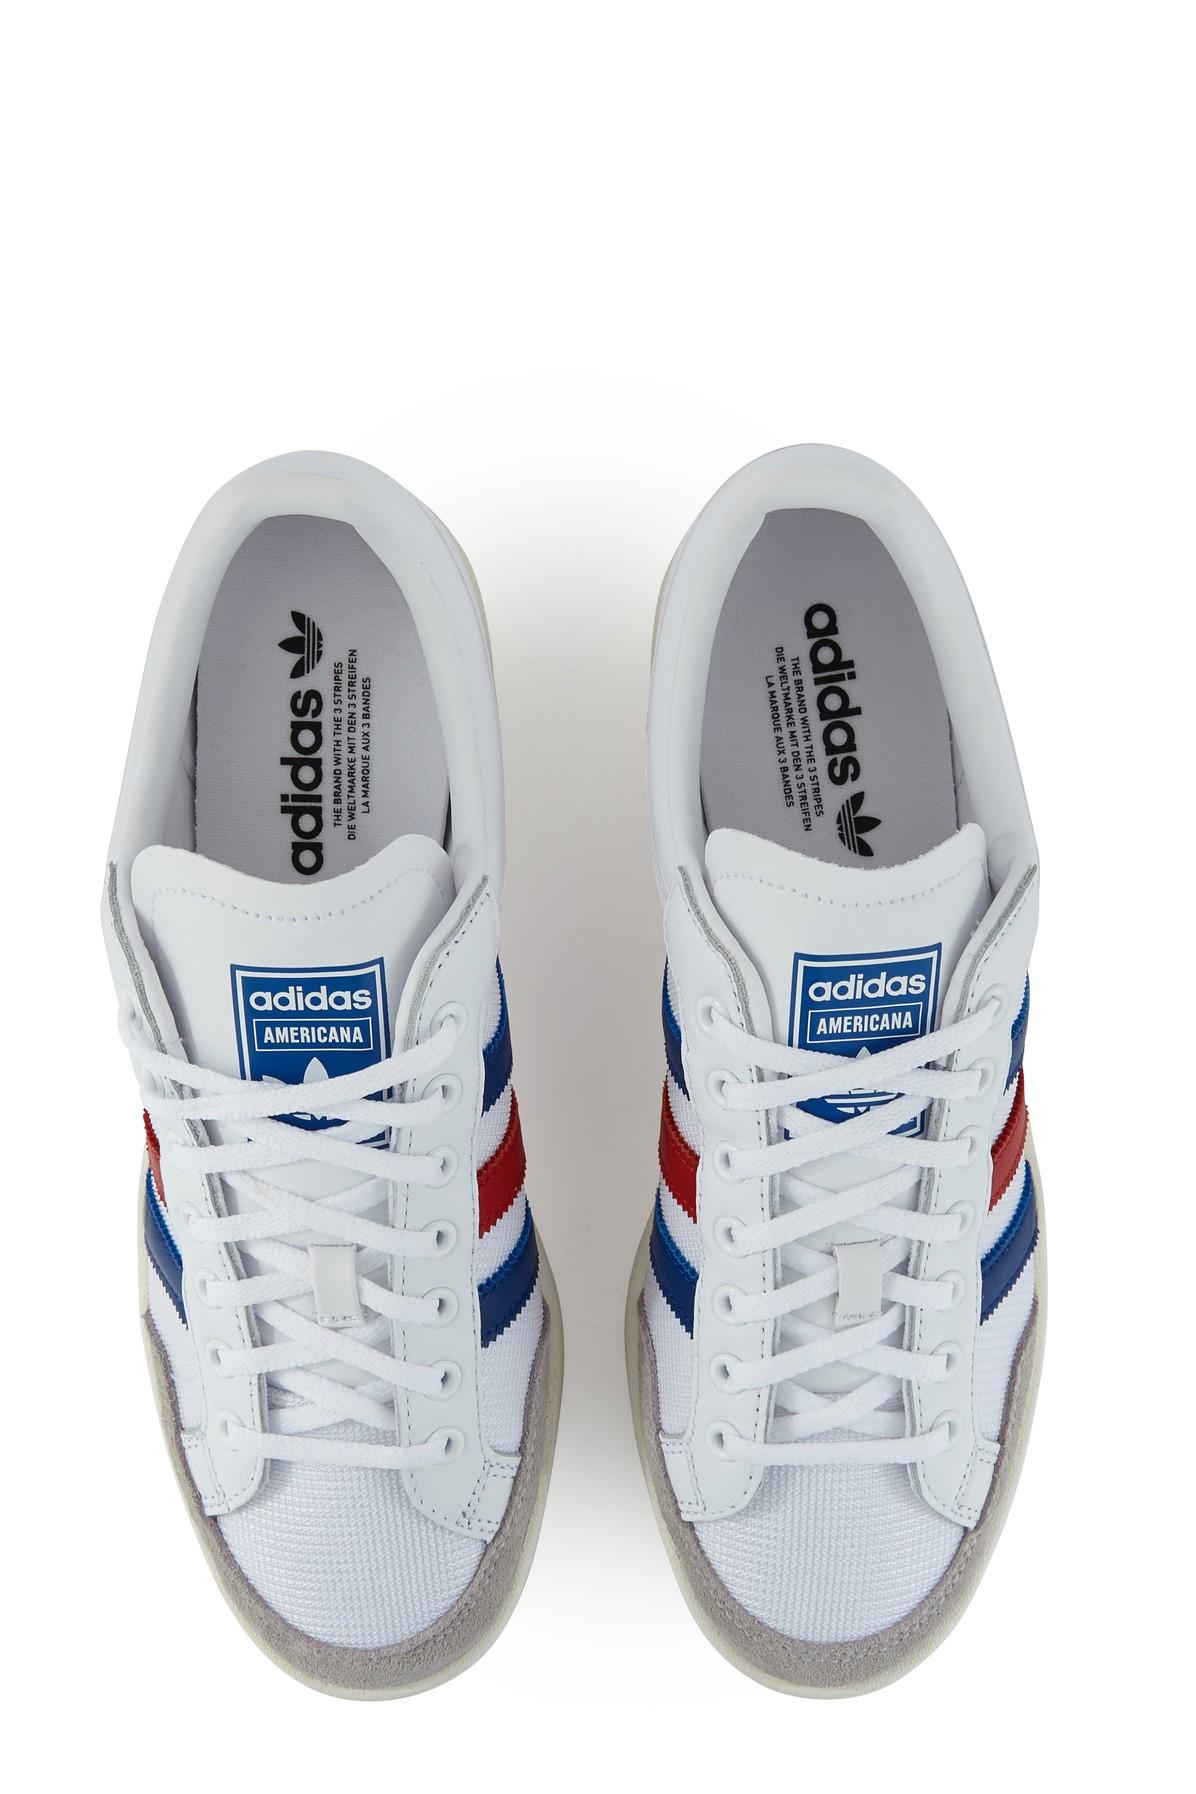 adidas Originals Americana Sneakers in Red/White/Blue (Blue) for Men - Lyst